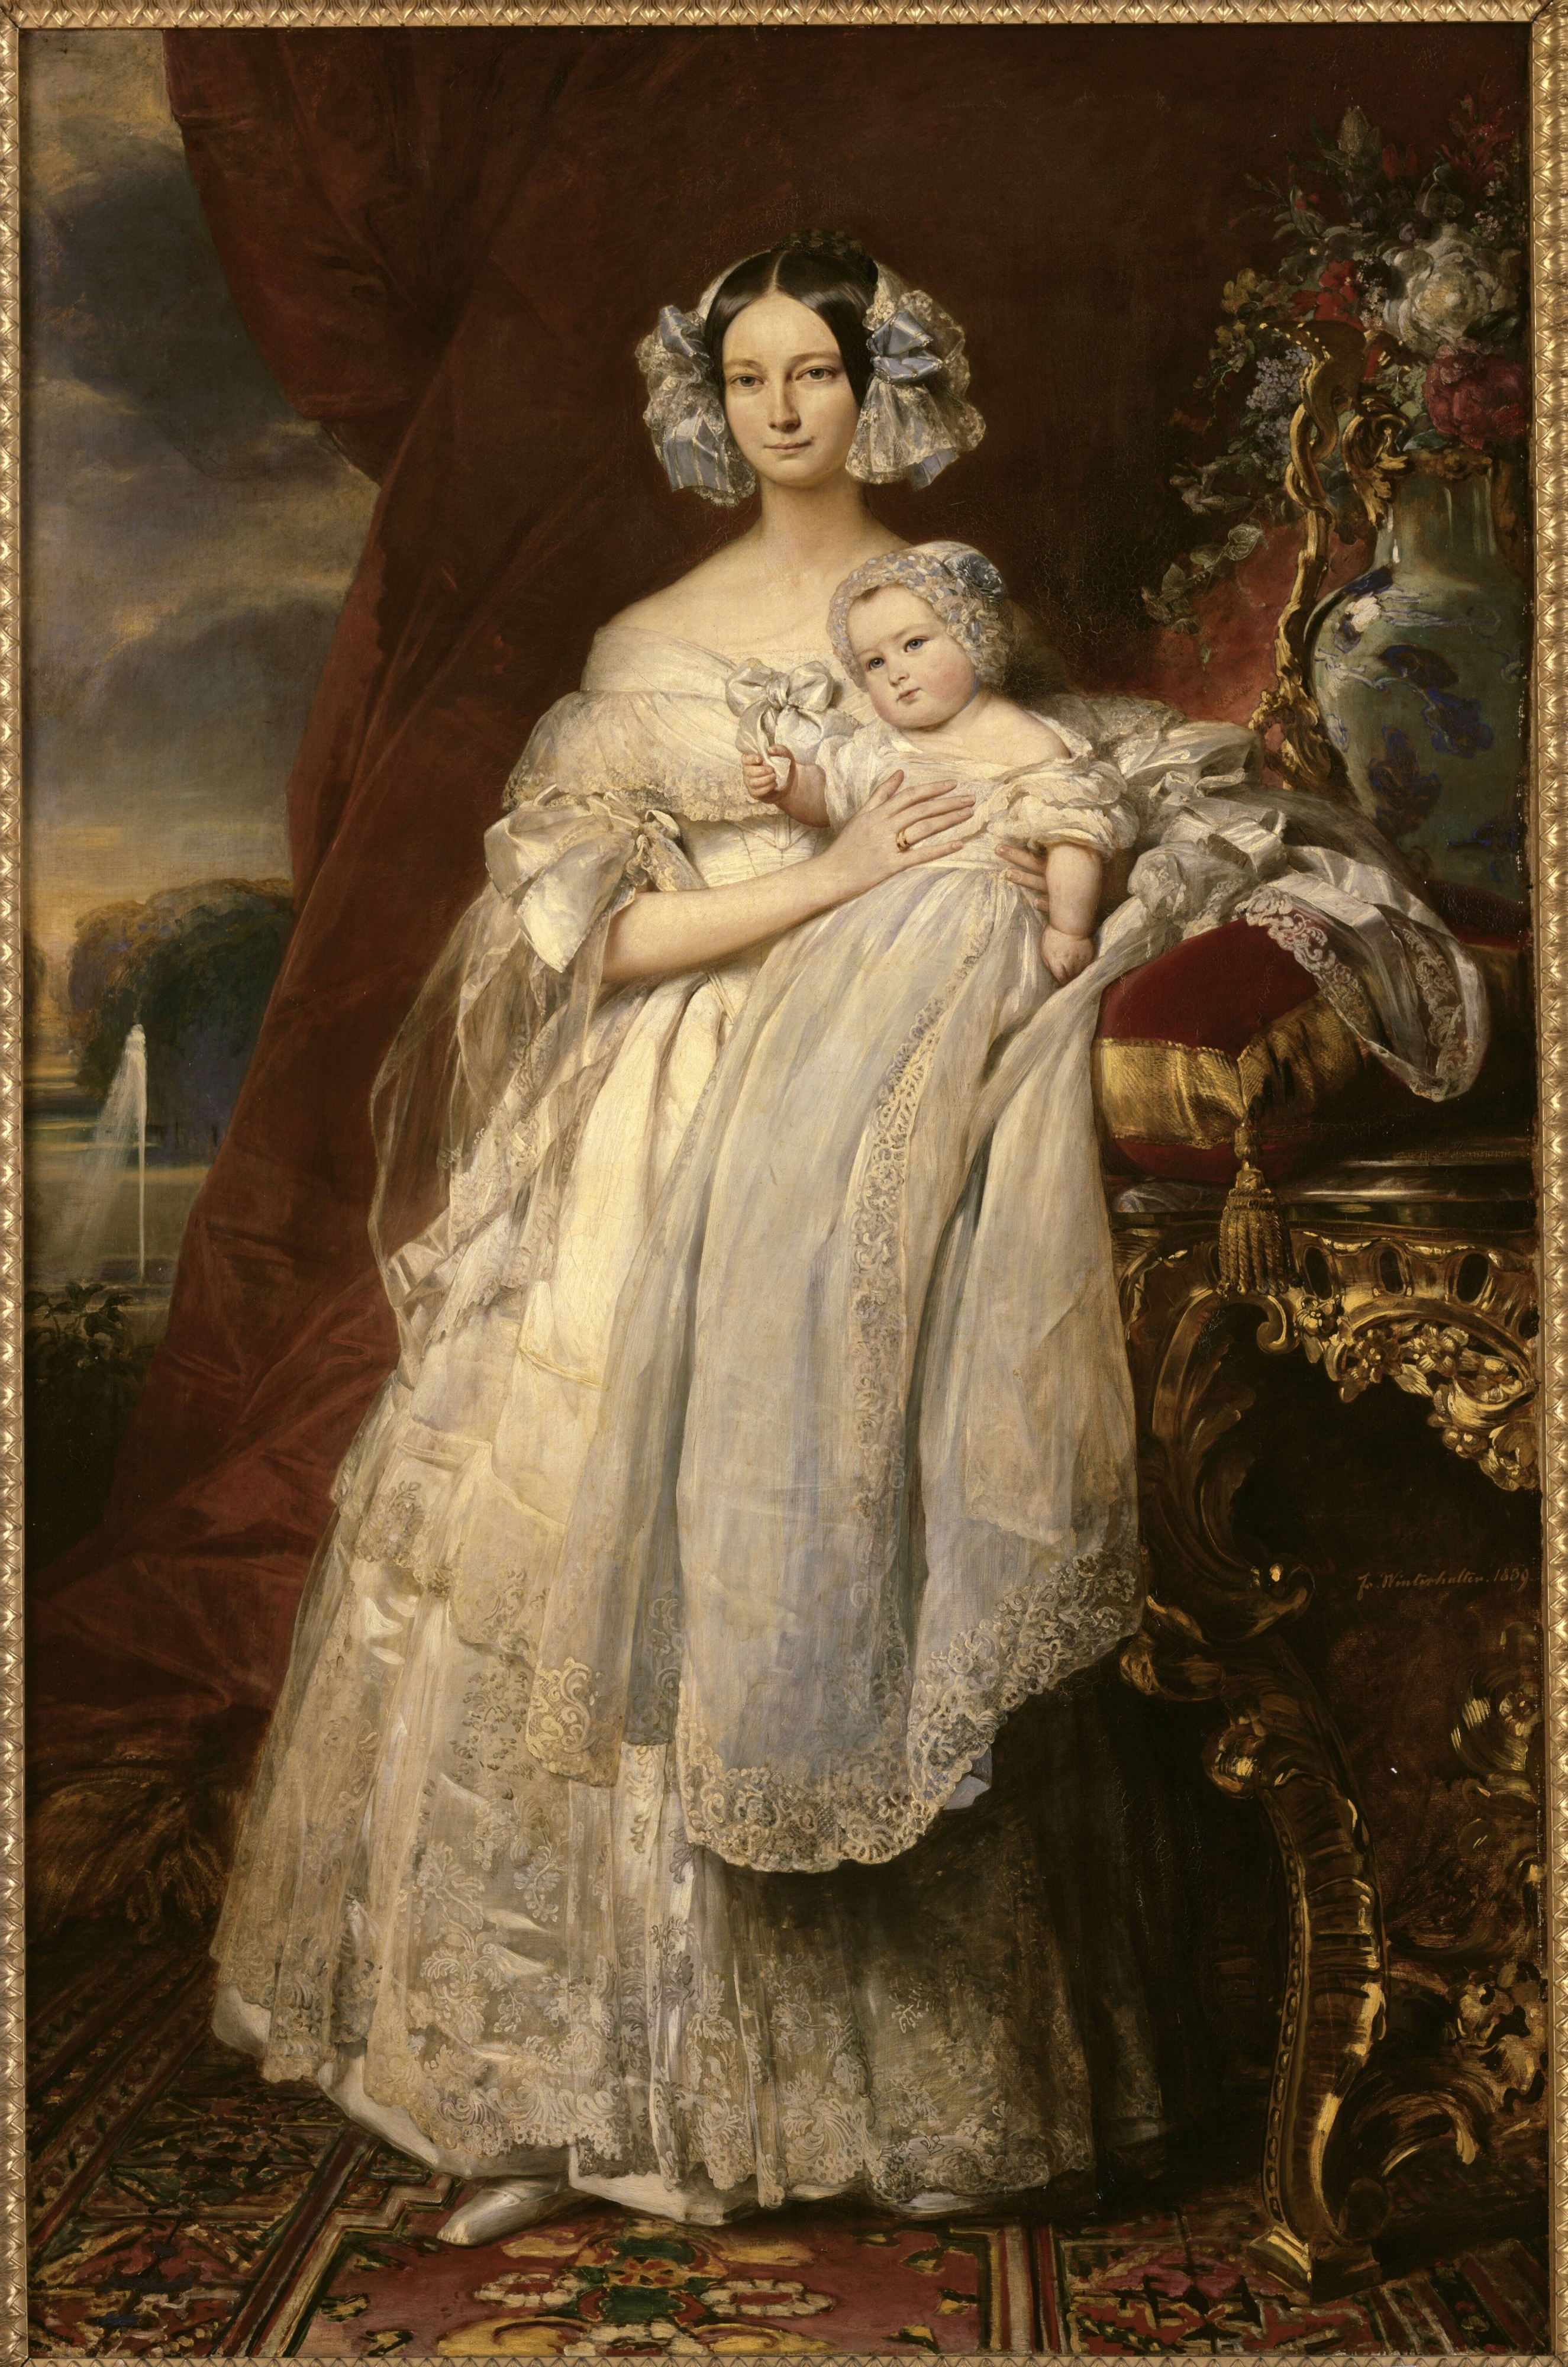 Portrait of Helene of Mecklenburg-Schwerin, (Duchess of Orleans) with her son Prince Louis Philippe, Count of Paris by Winterhalter